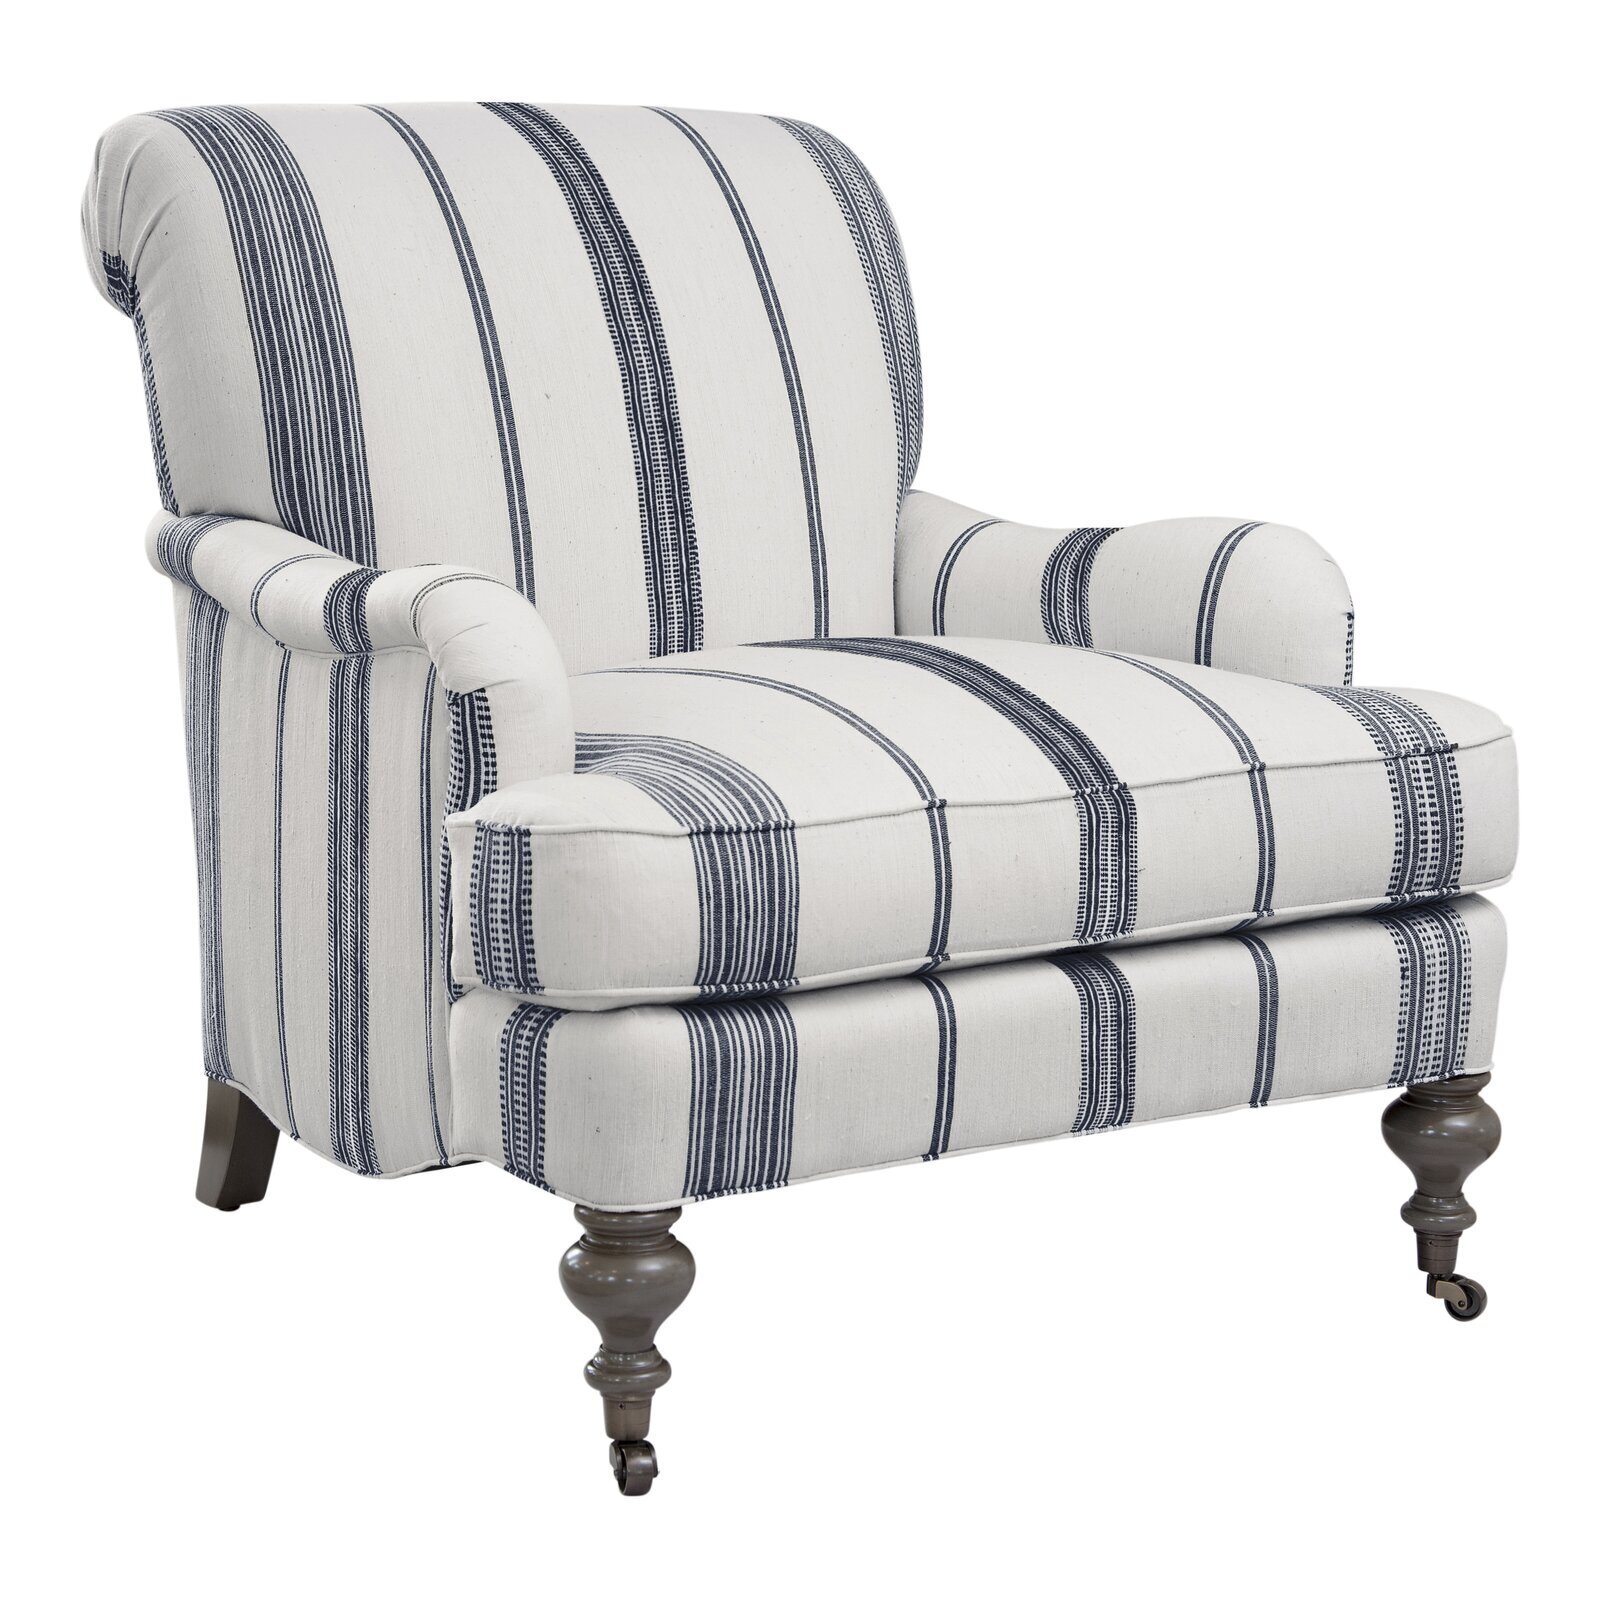 Blue Striped Chair with Wheels